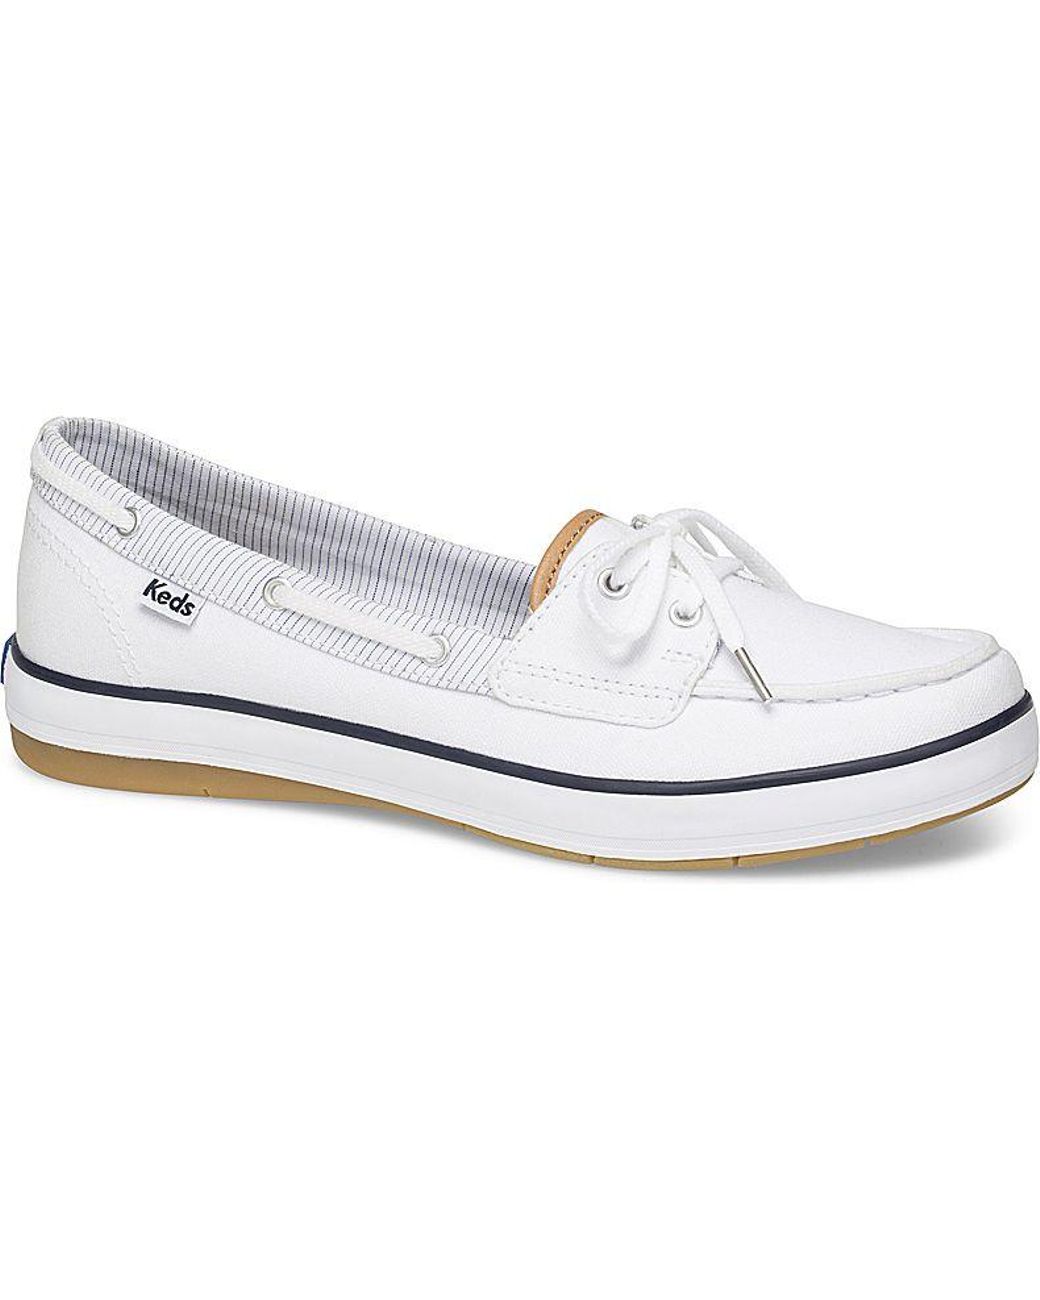 Keds Canvas Charter Boat Shoe in White | Lyst